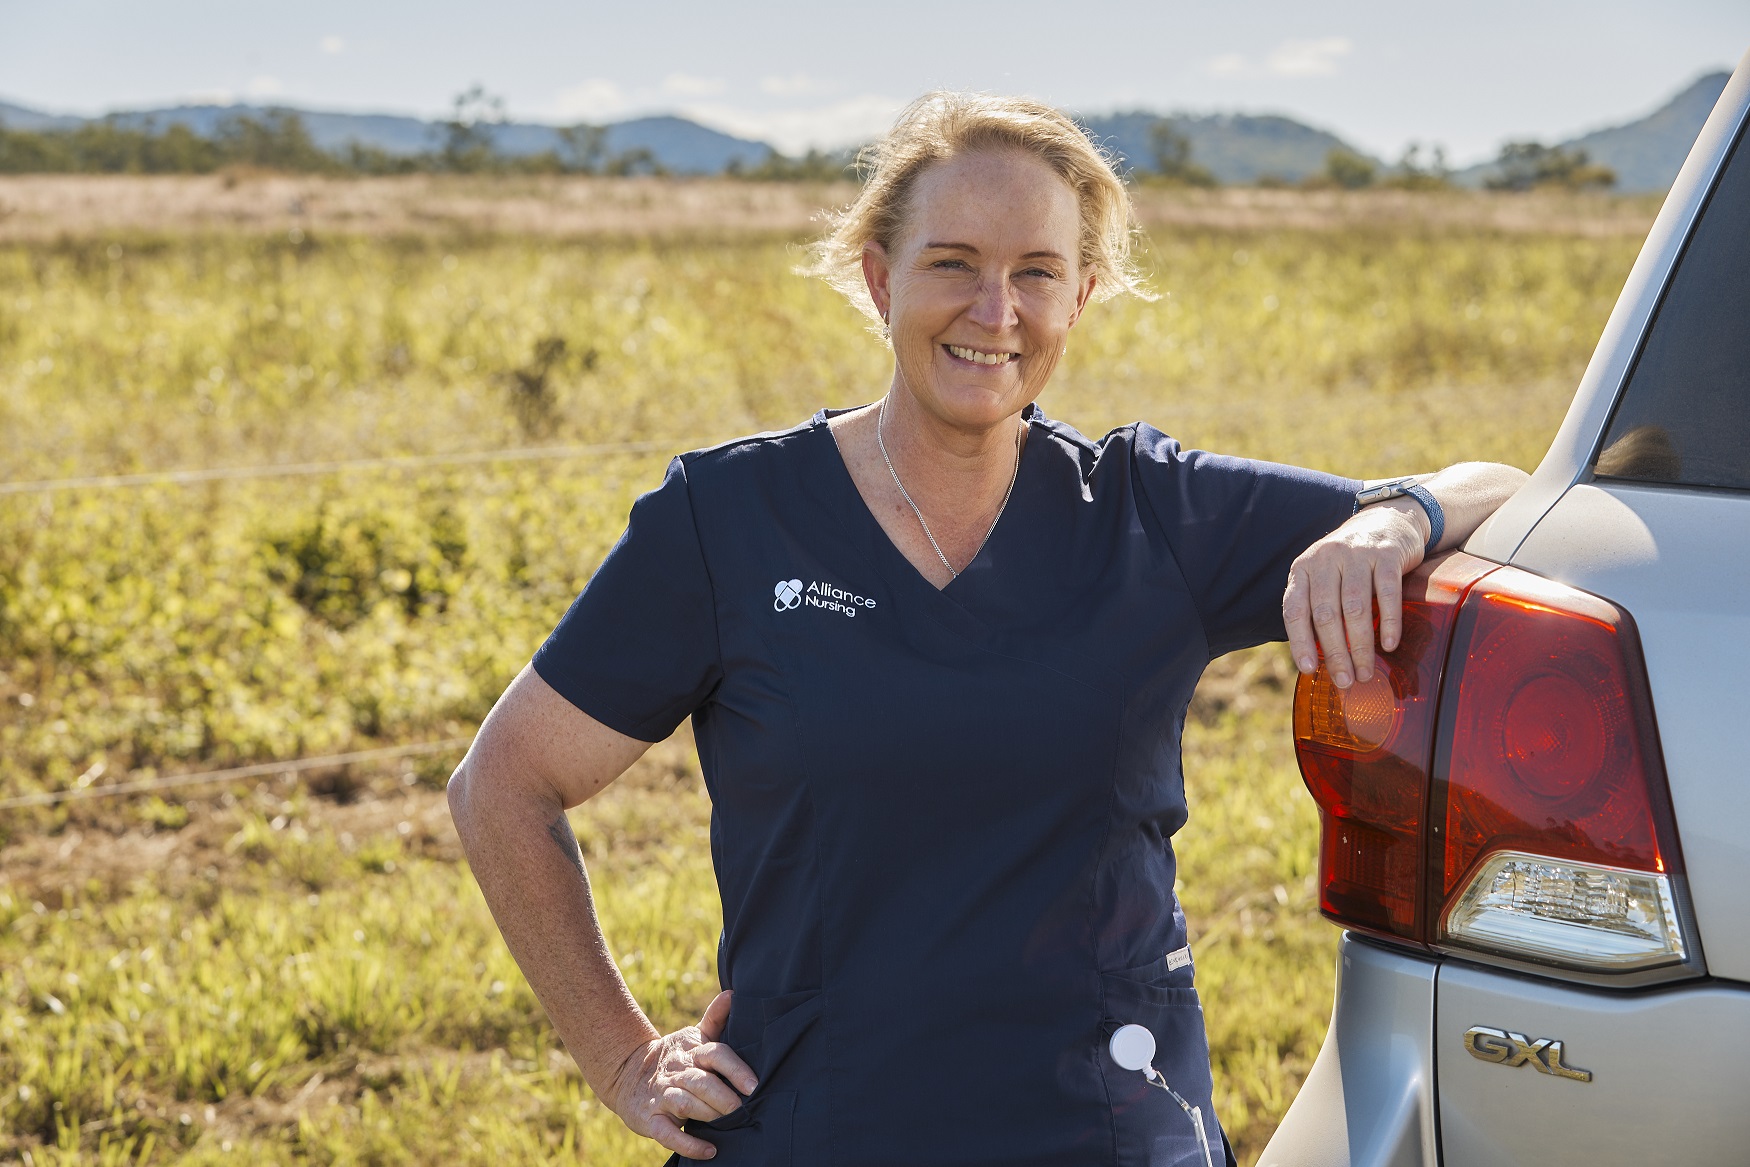 Nurse leaning on car in the outback